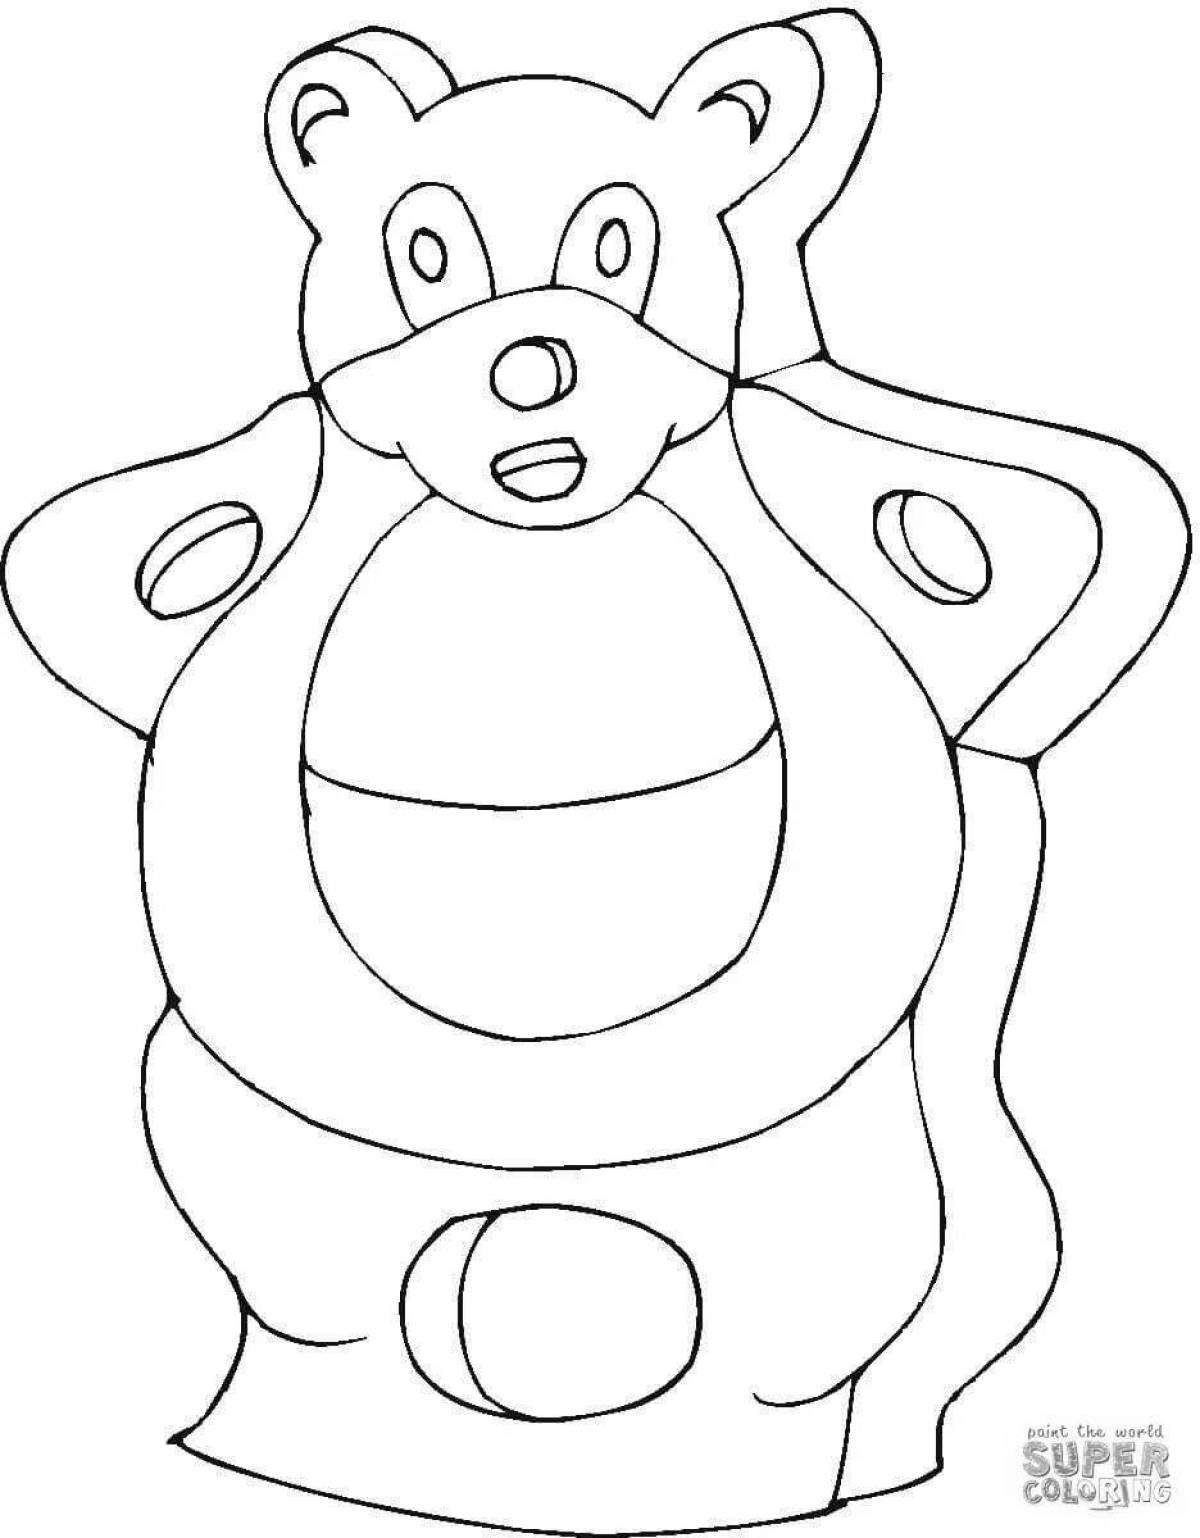 Stimulating cognizer coloring page